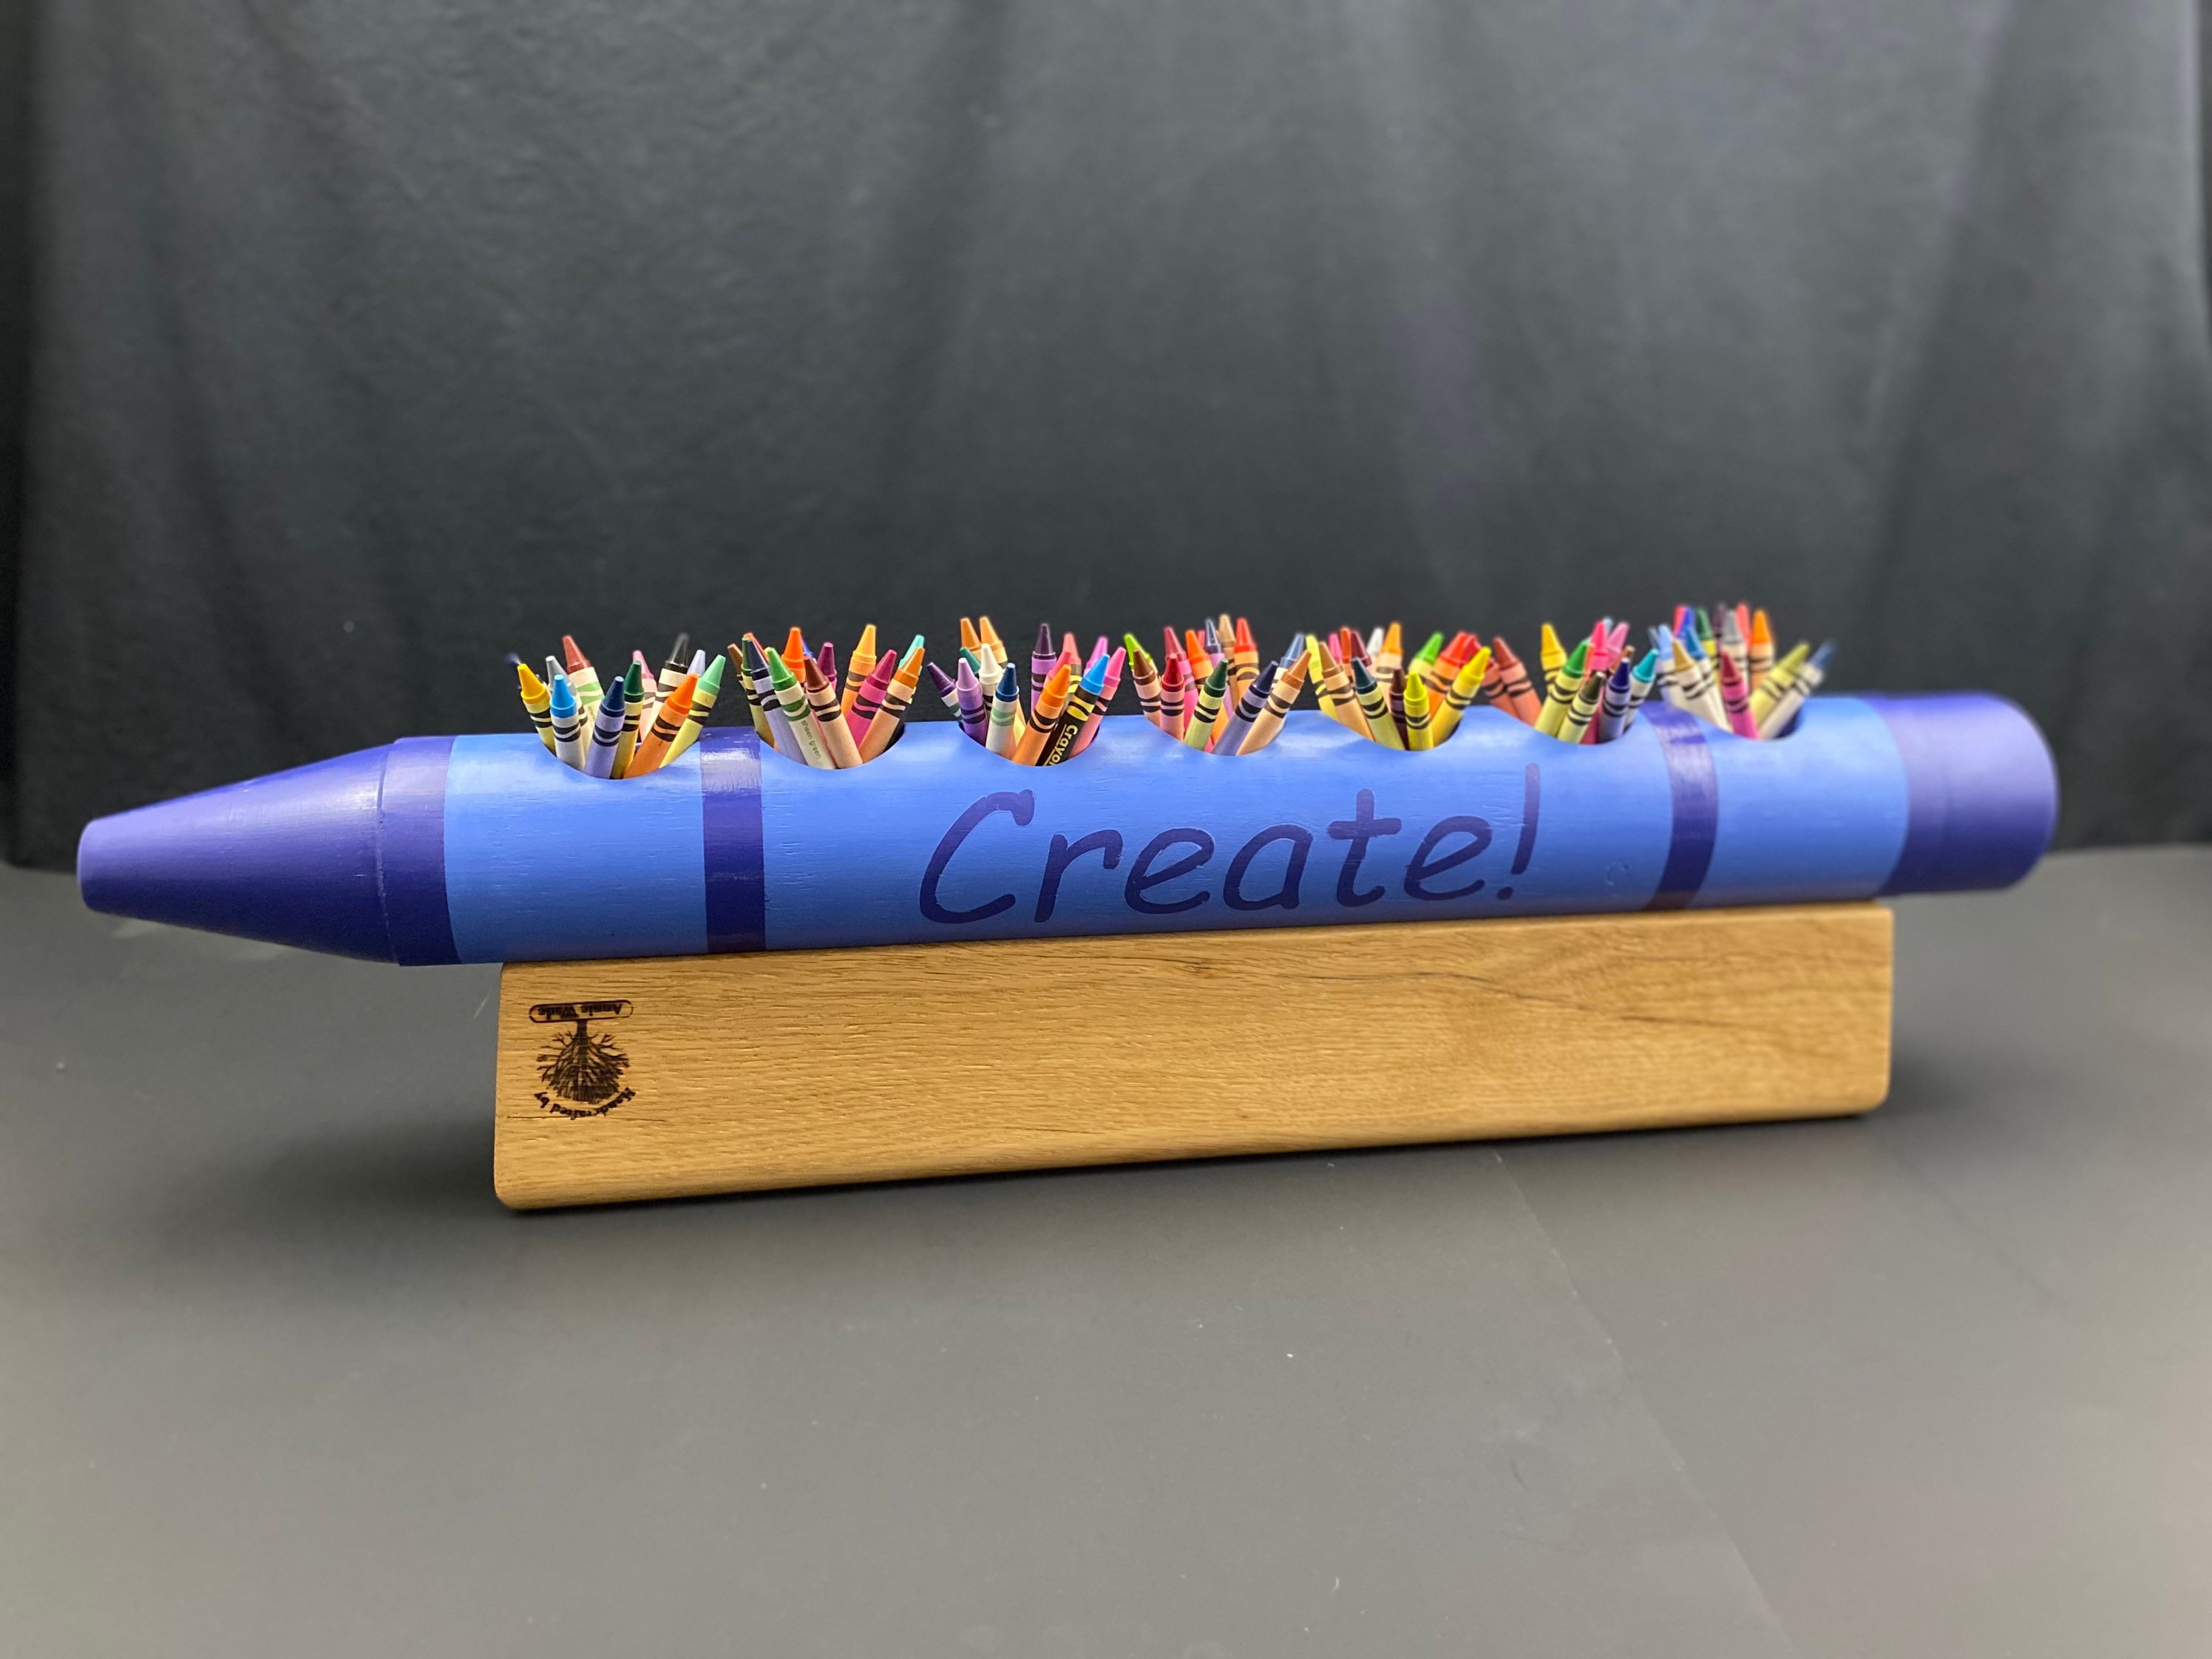 Giant Crayon Prop - WhiteClouds